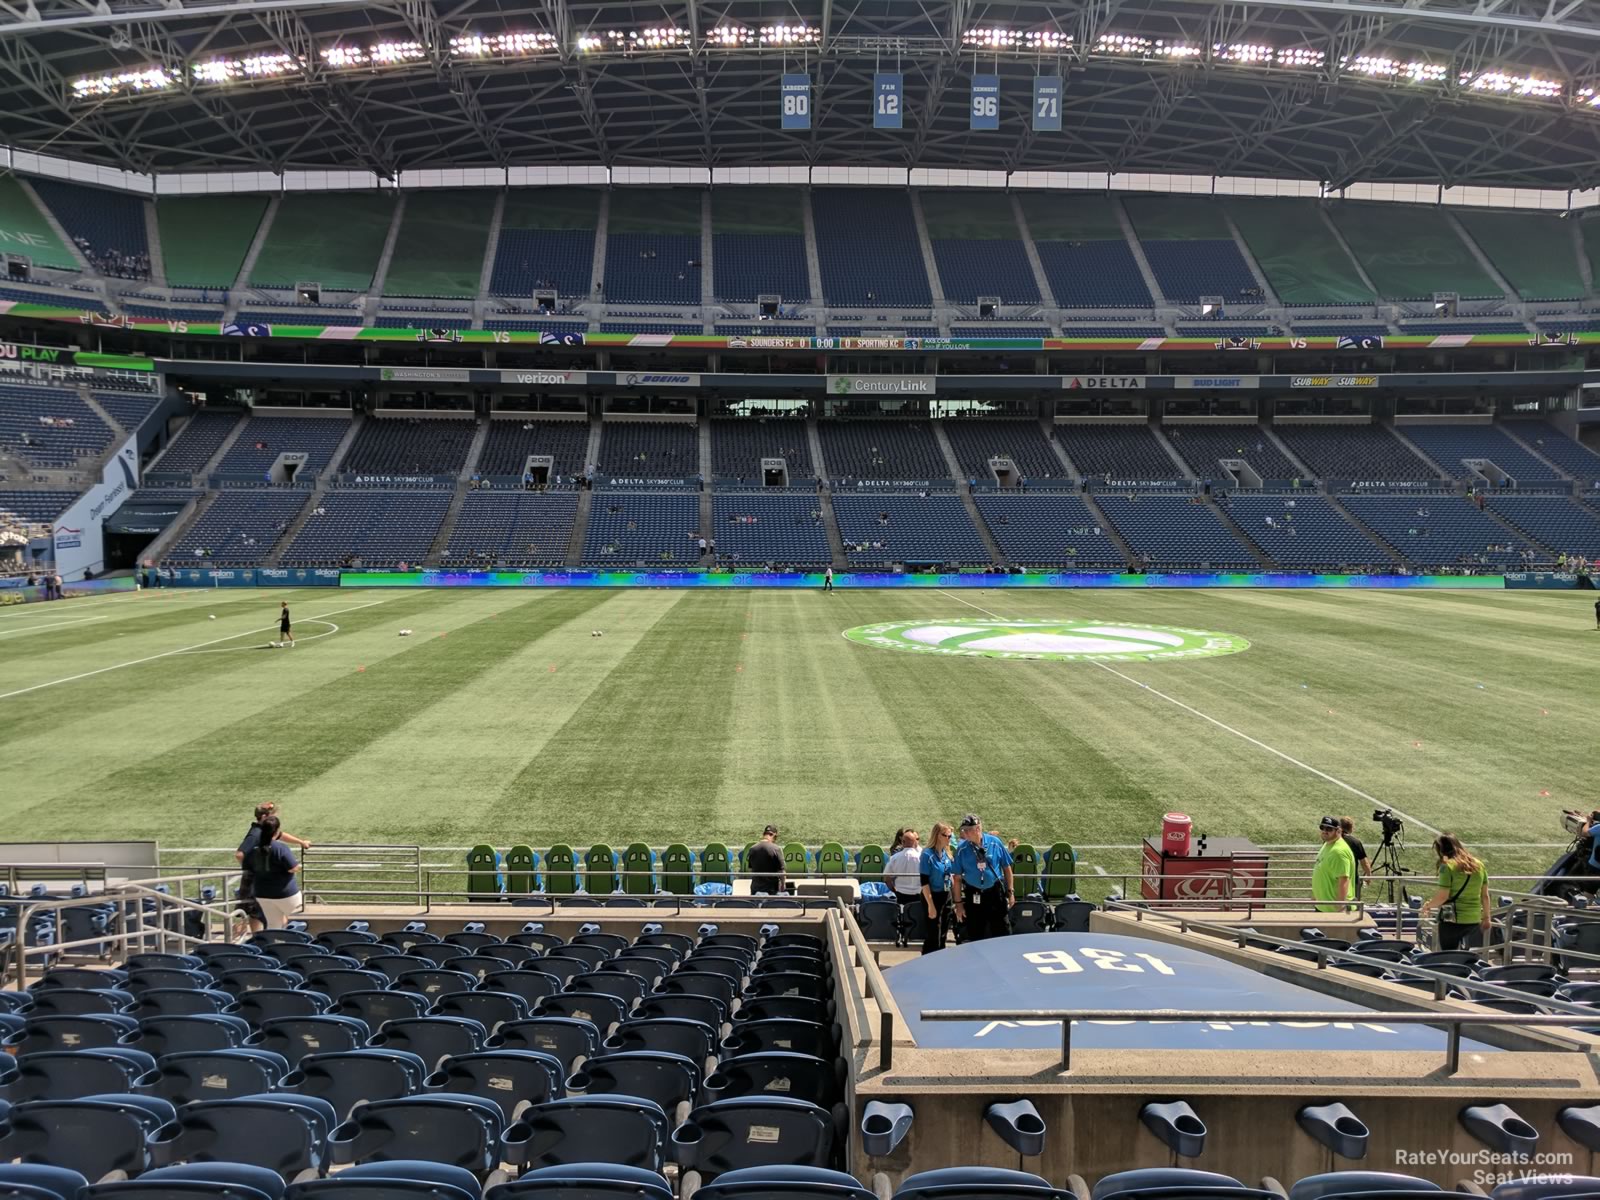 Sounders Seating Chart